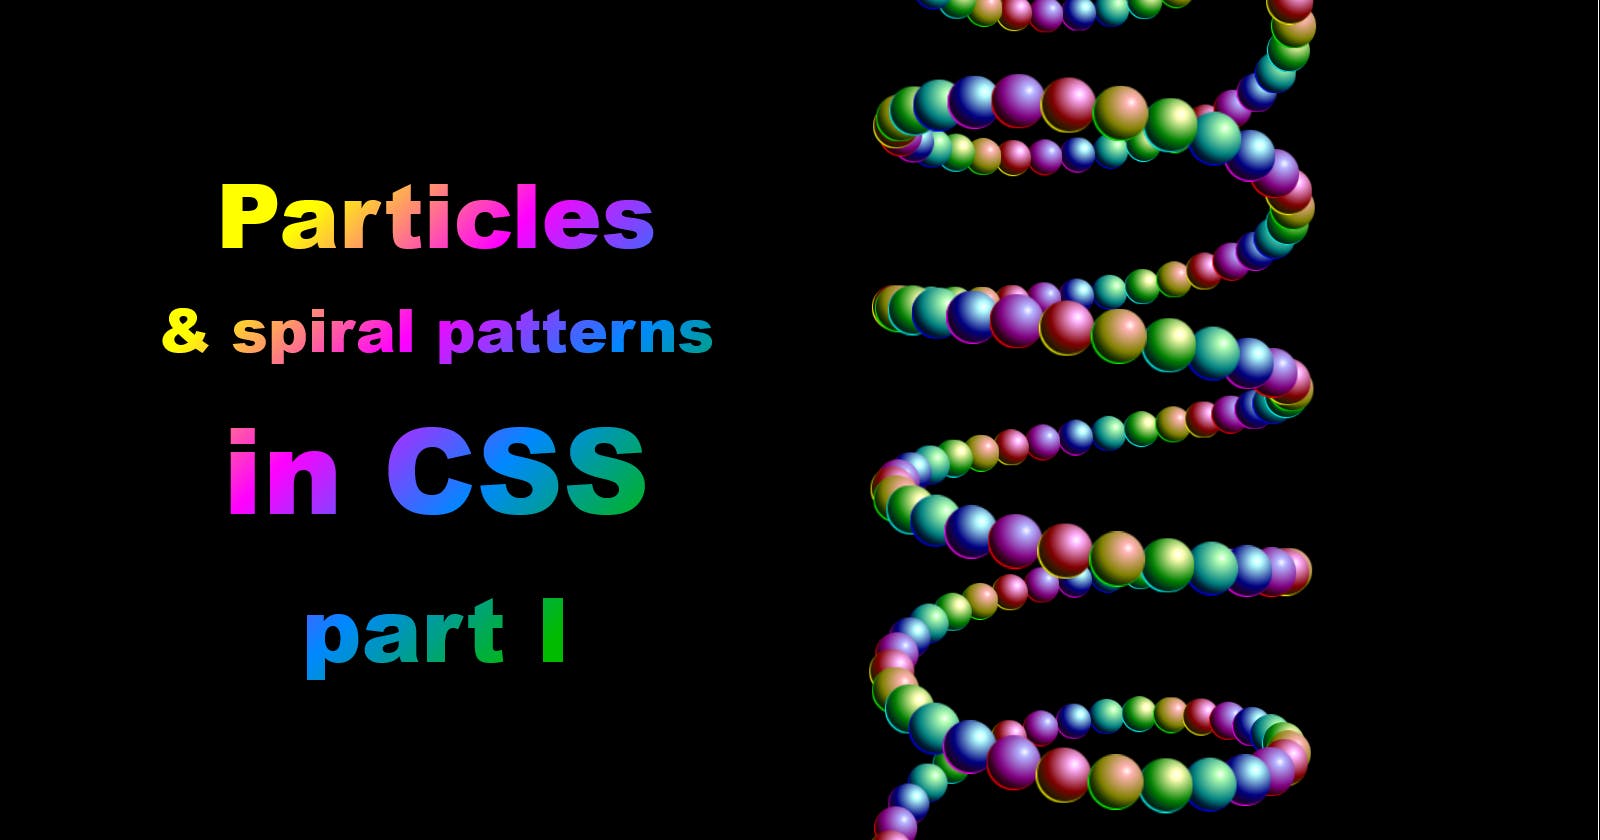 Particles & spiral patterns in CSS: part I